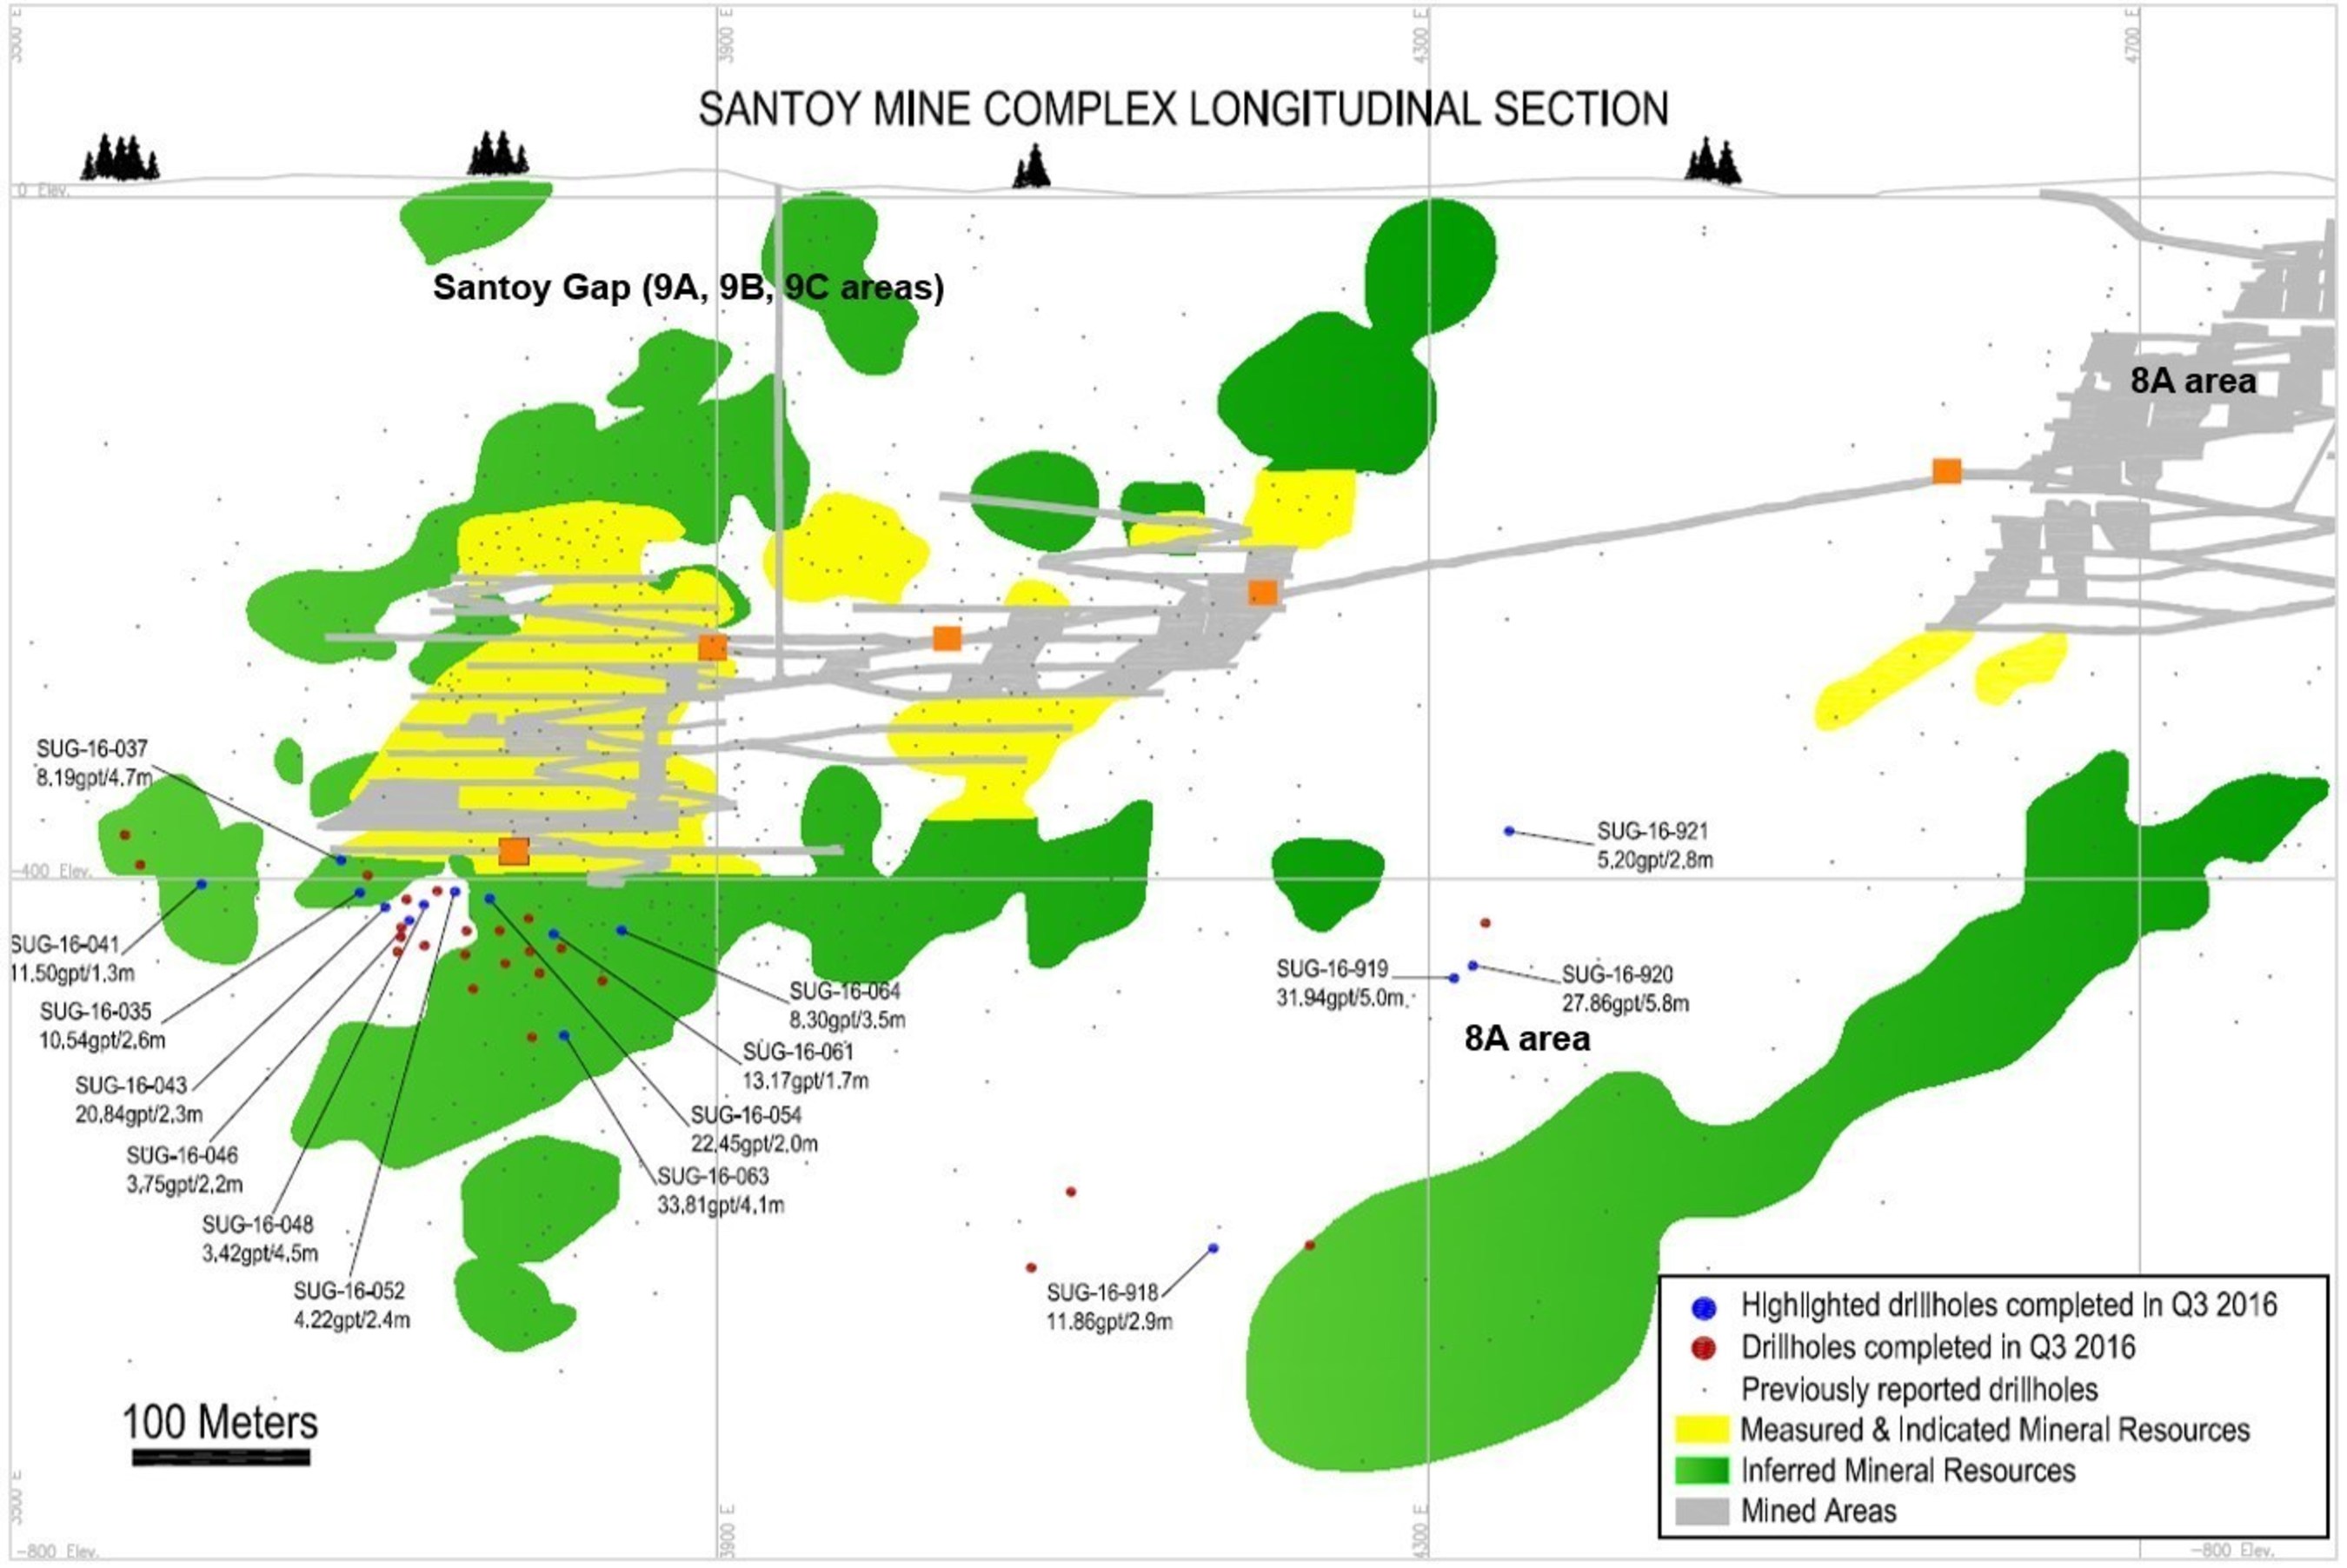 Figure 4. Longitudinal section for the third quarter 2016 exploration drill program at Santoy mine complex, Seabee Gold Operation, Saskatchewan, Canada. Note: Measured and Indicated Mineral Resources, Inferred Mineral Resources and Mined Areas are as at December 31, 2015 as reported by Claude Resources Inc.